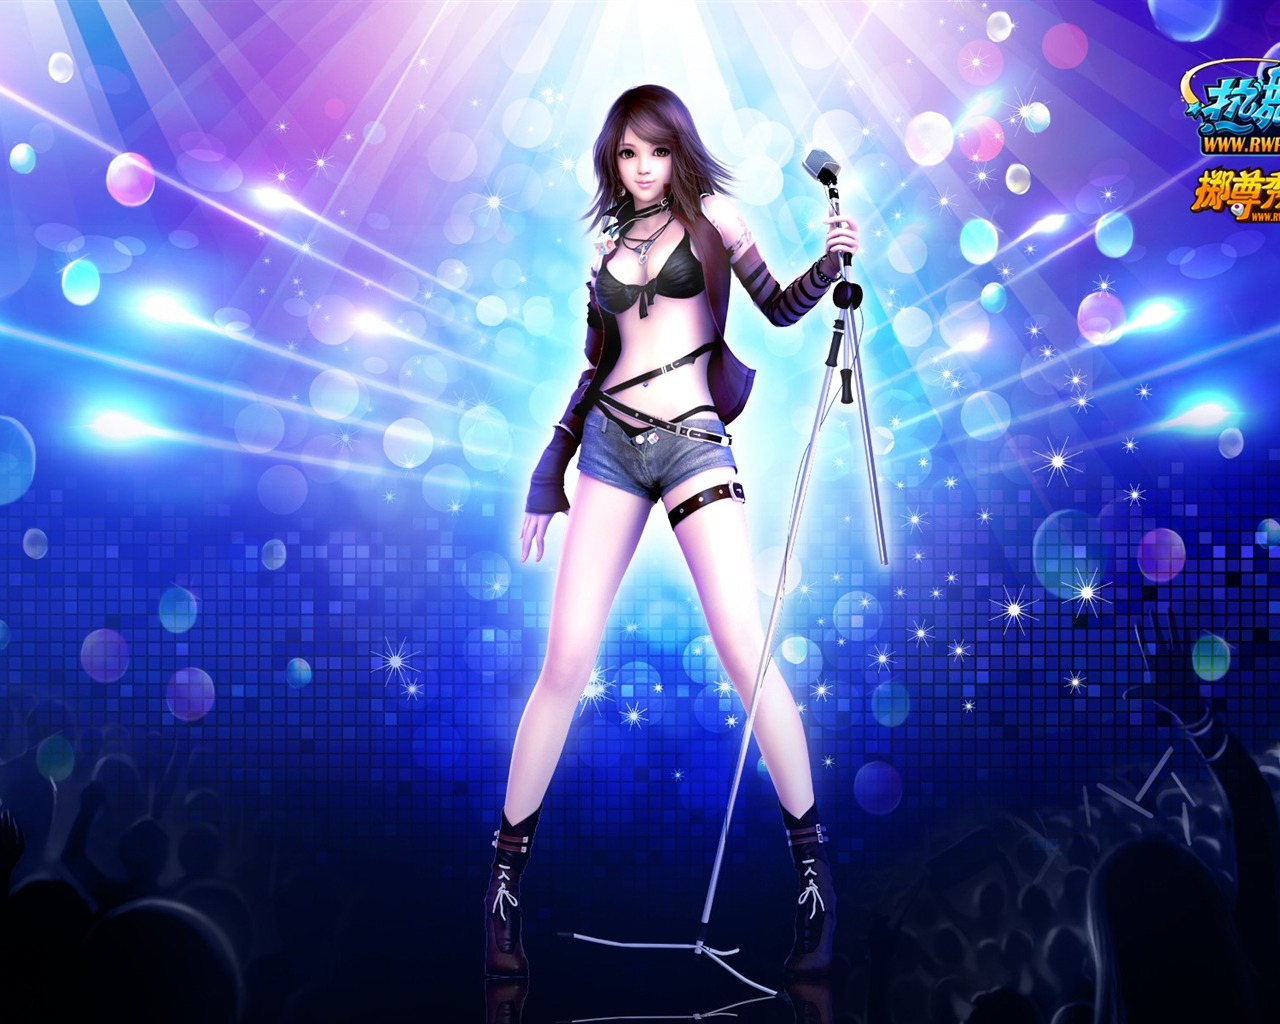 Online game Hot Dance Party II official wallpapers #39 - 1280x1024